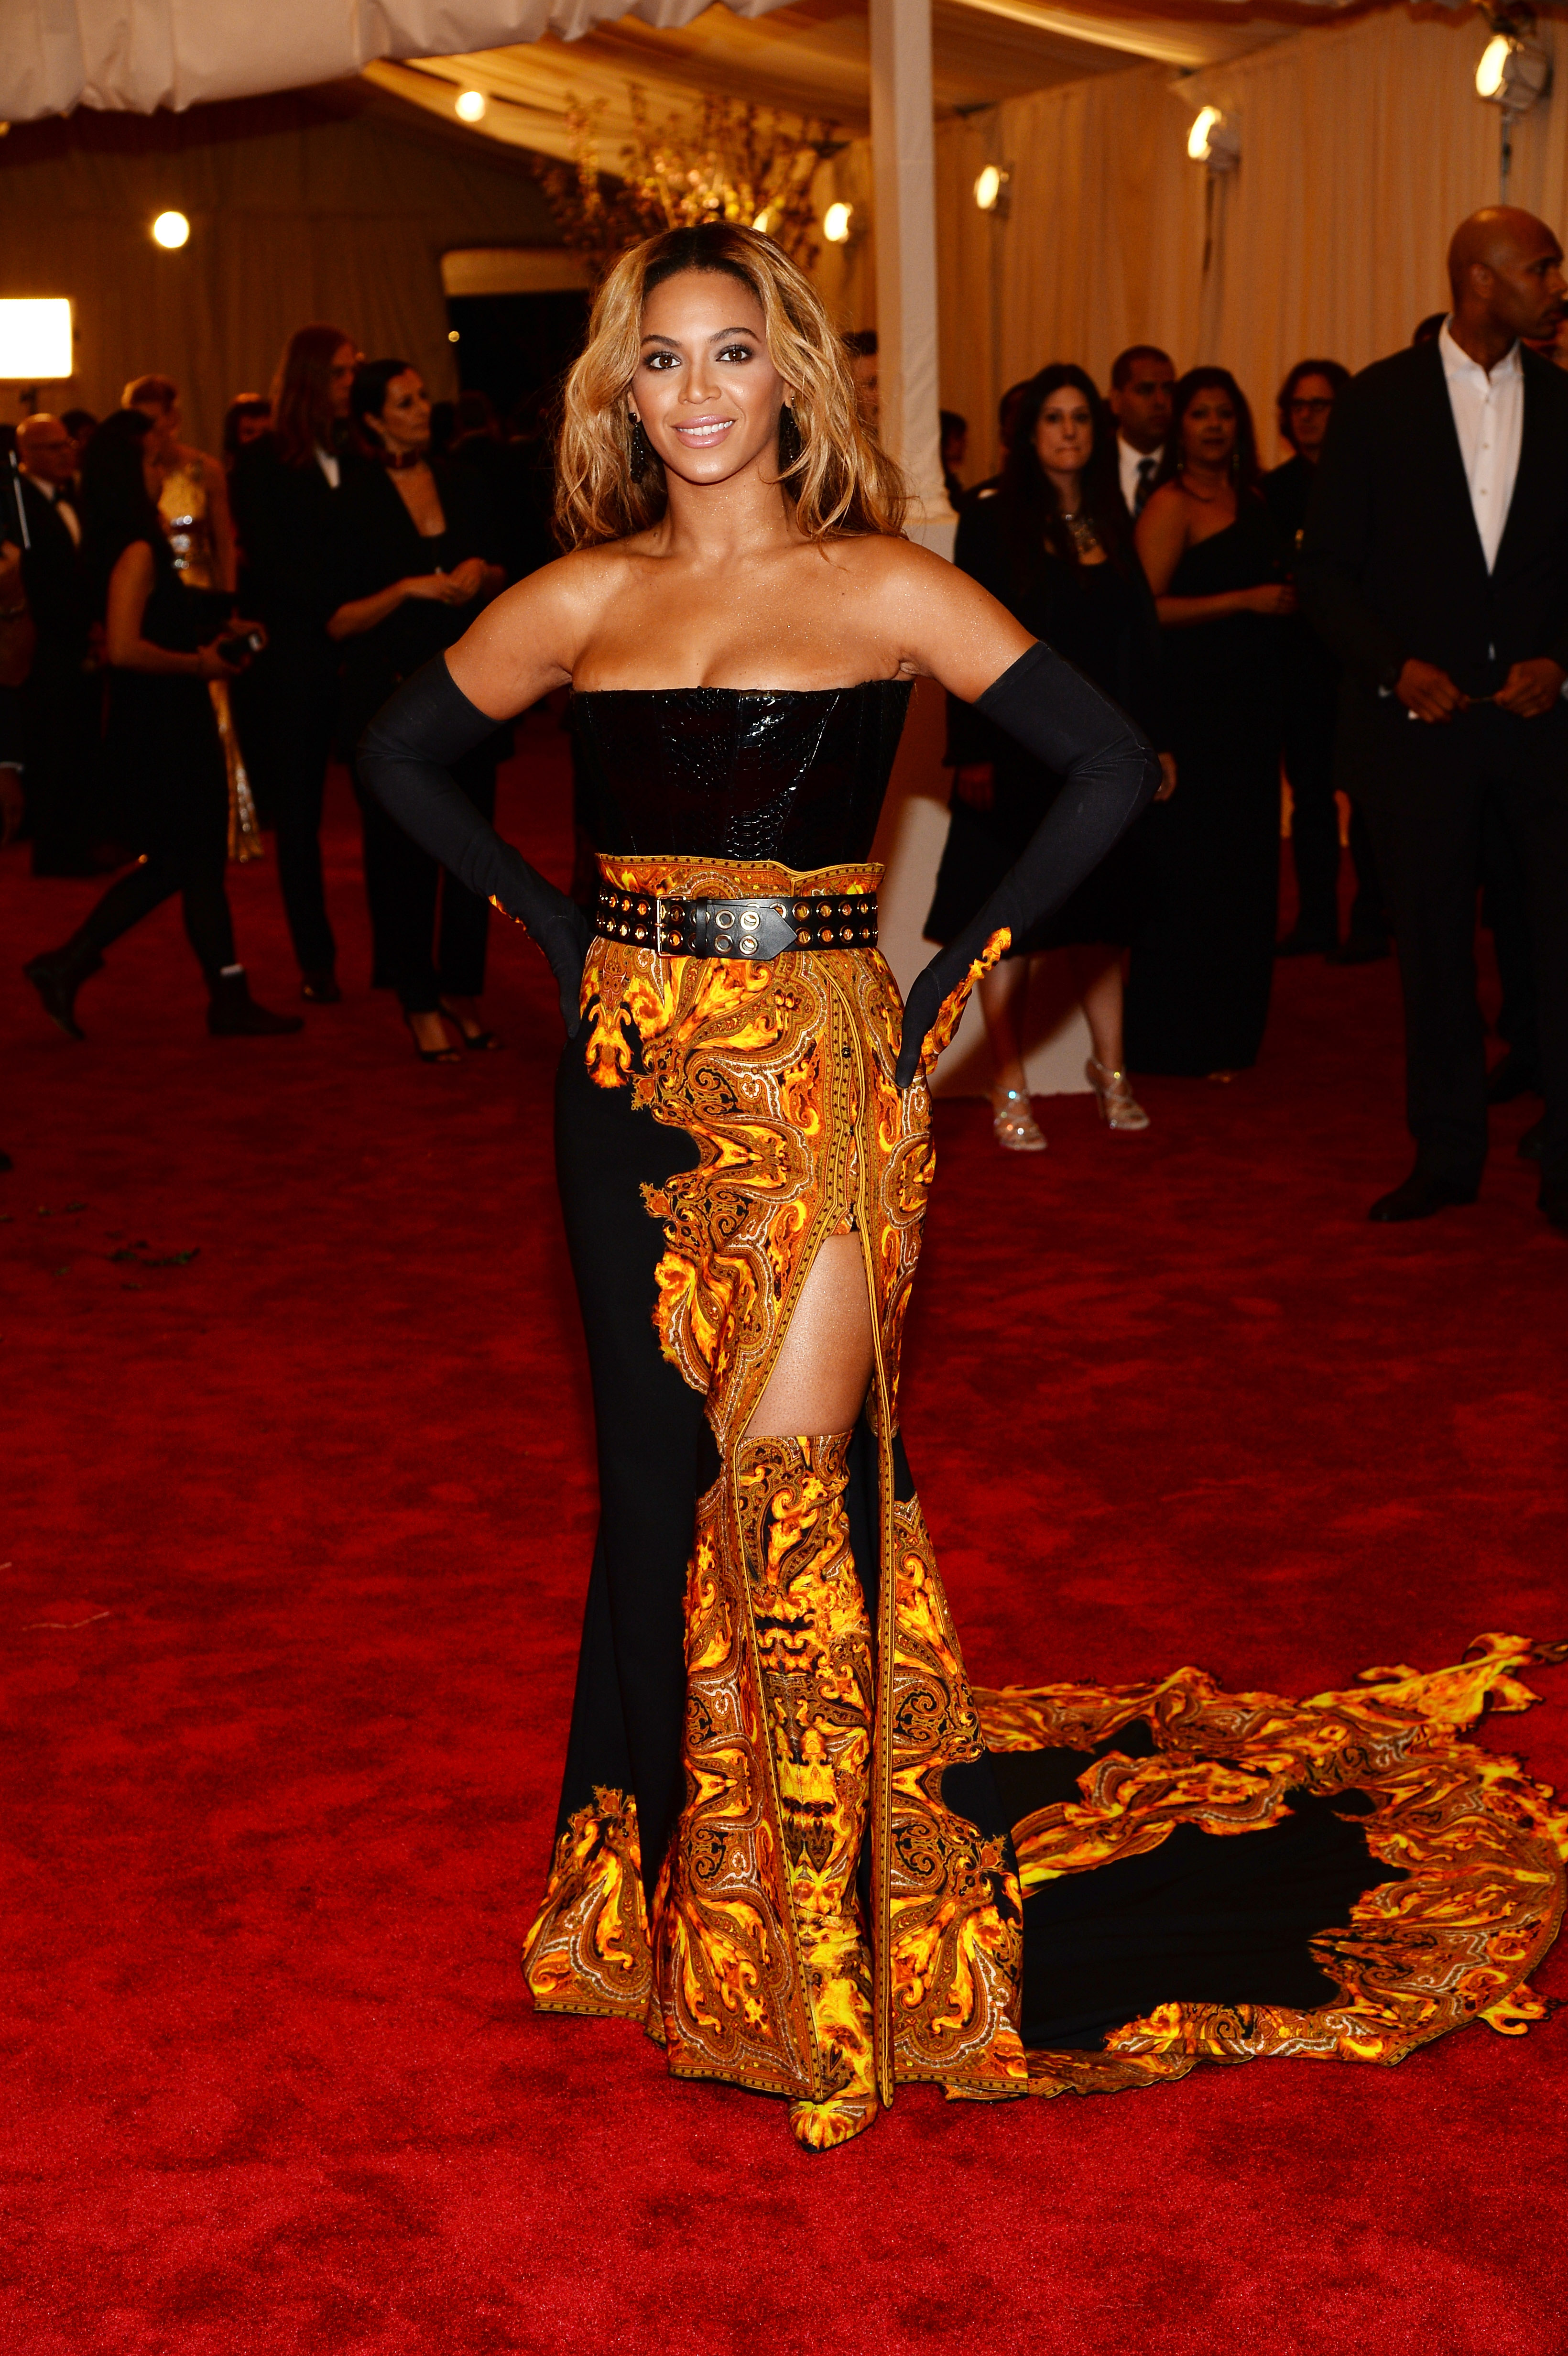 NEW YORK, NY - MAY 06: Beyonce attends the Costume Institute Gala for the 